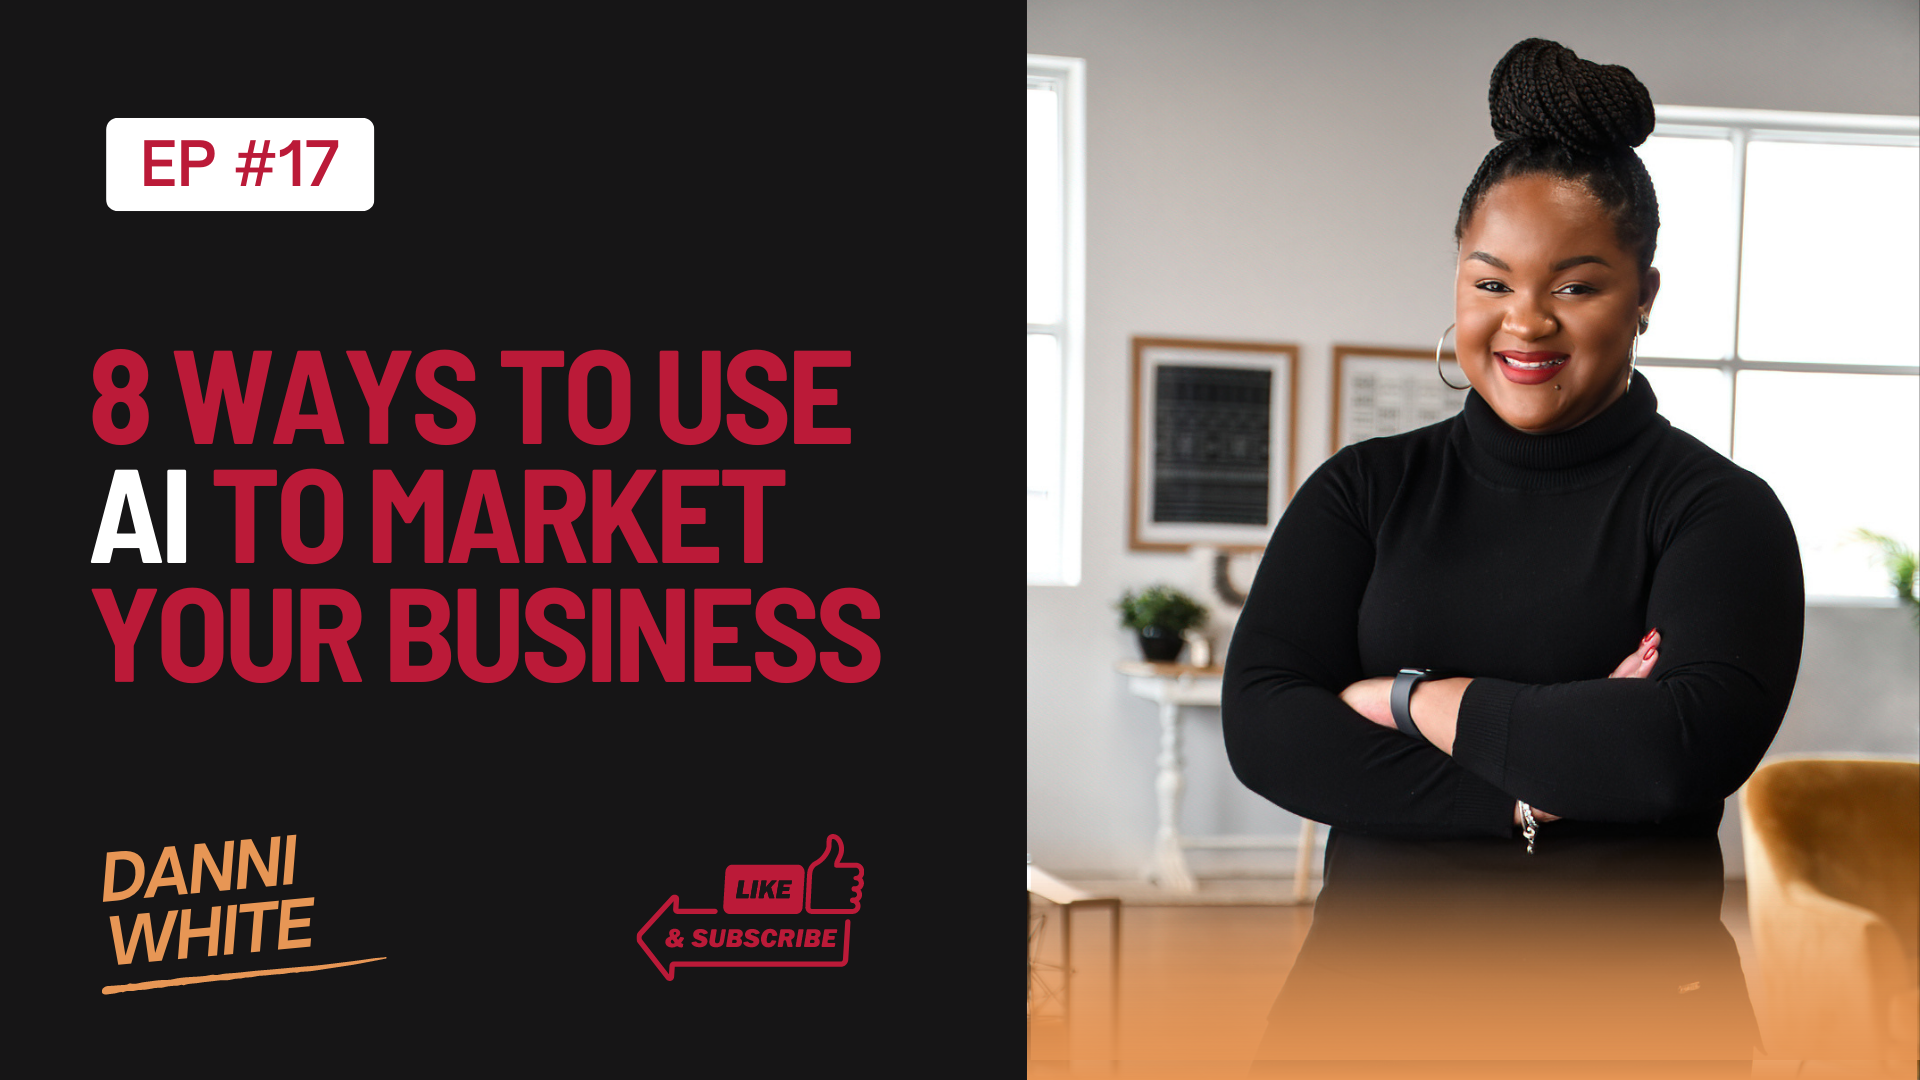 Episode 17: 8 Ways to Use AI to Market Your Business